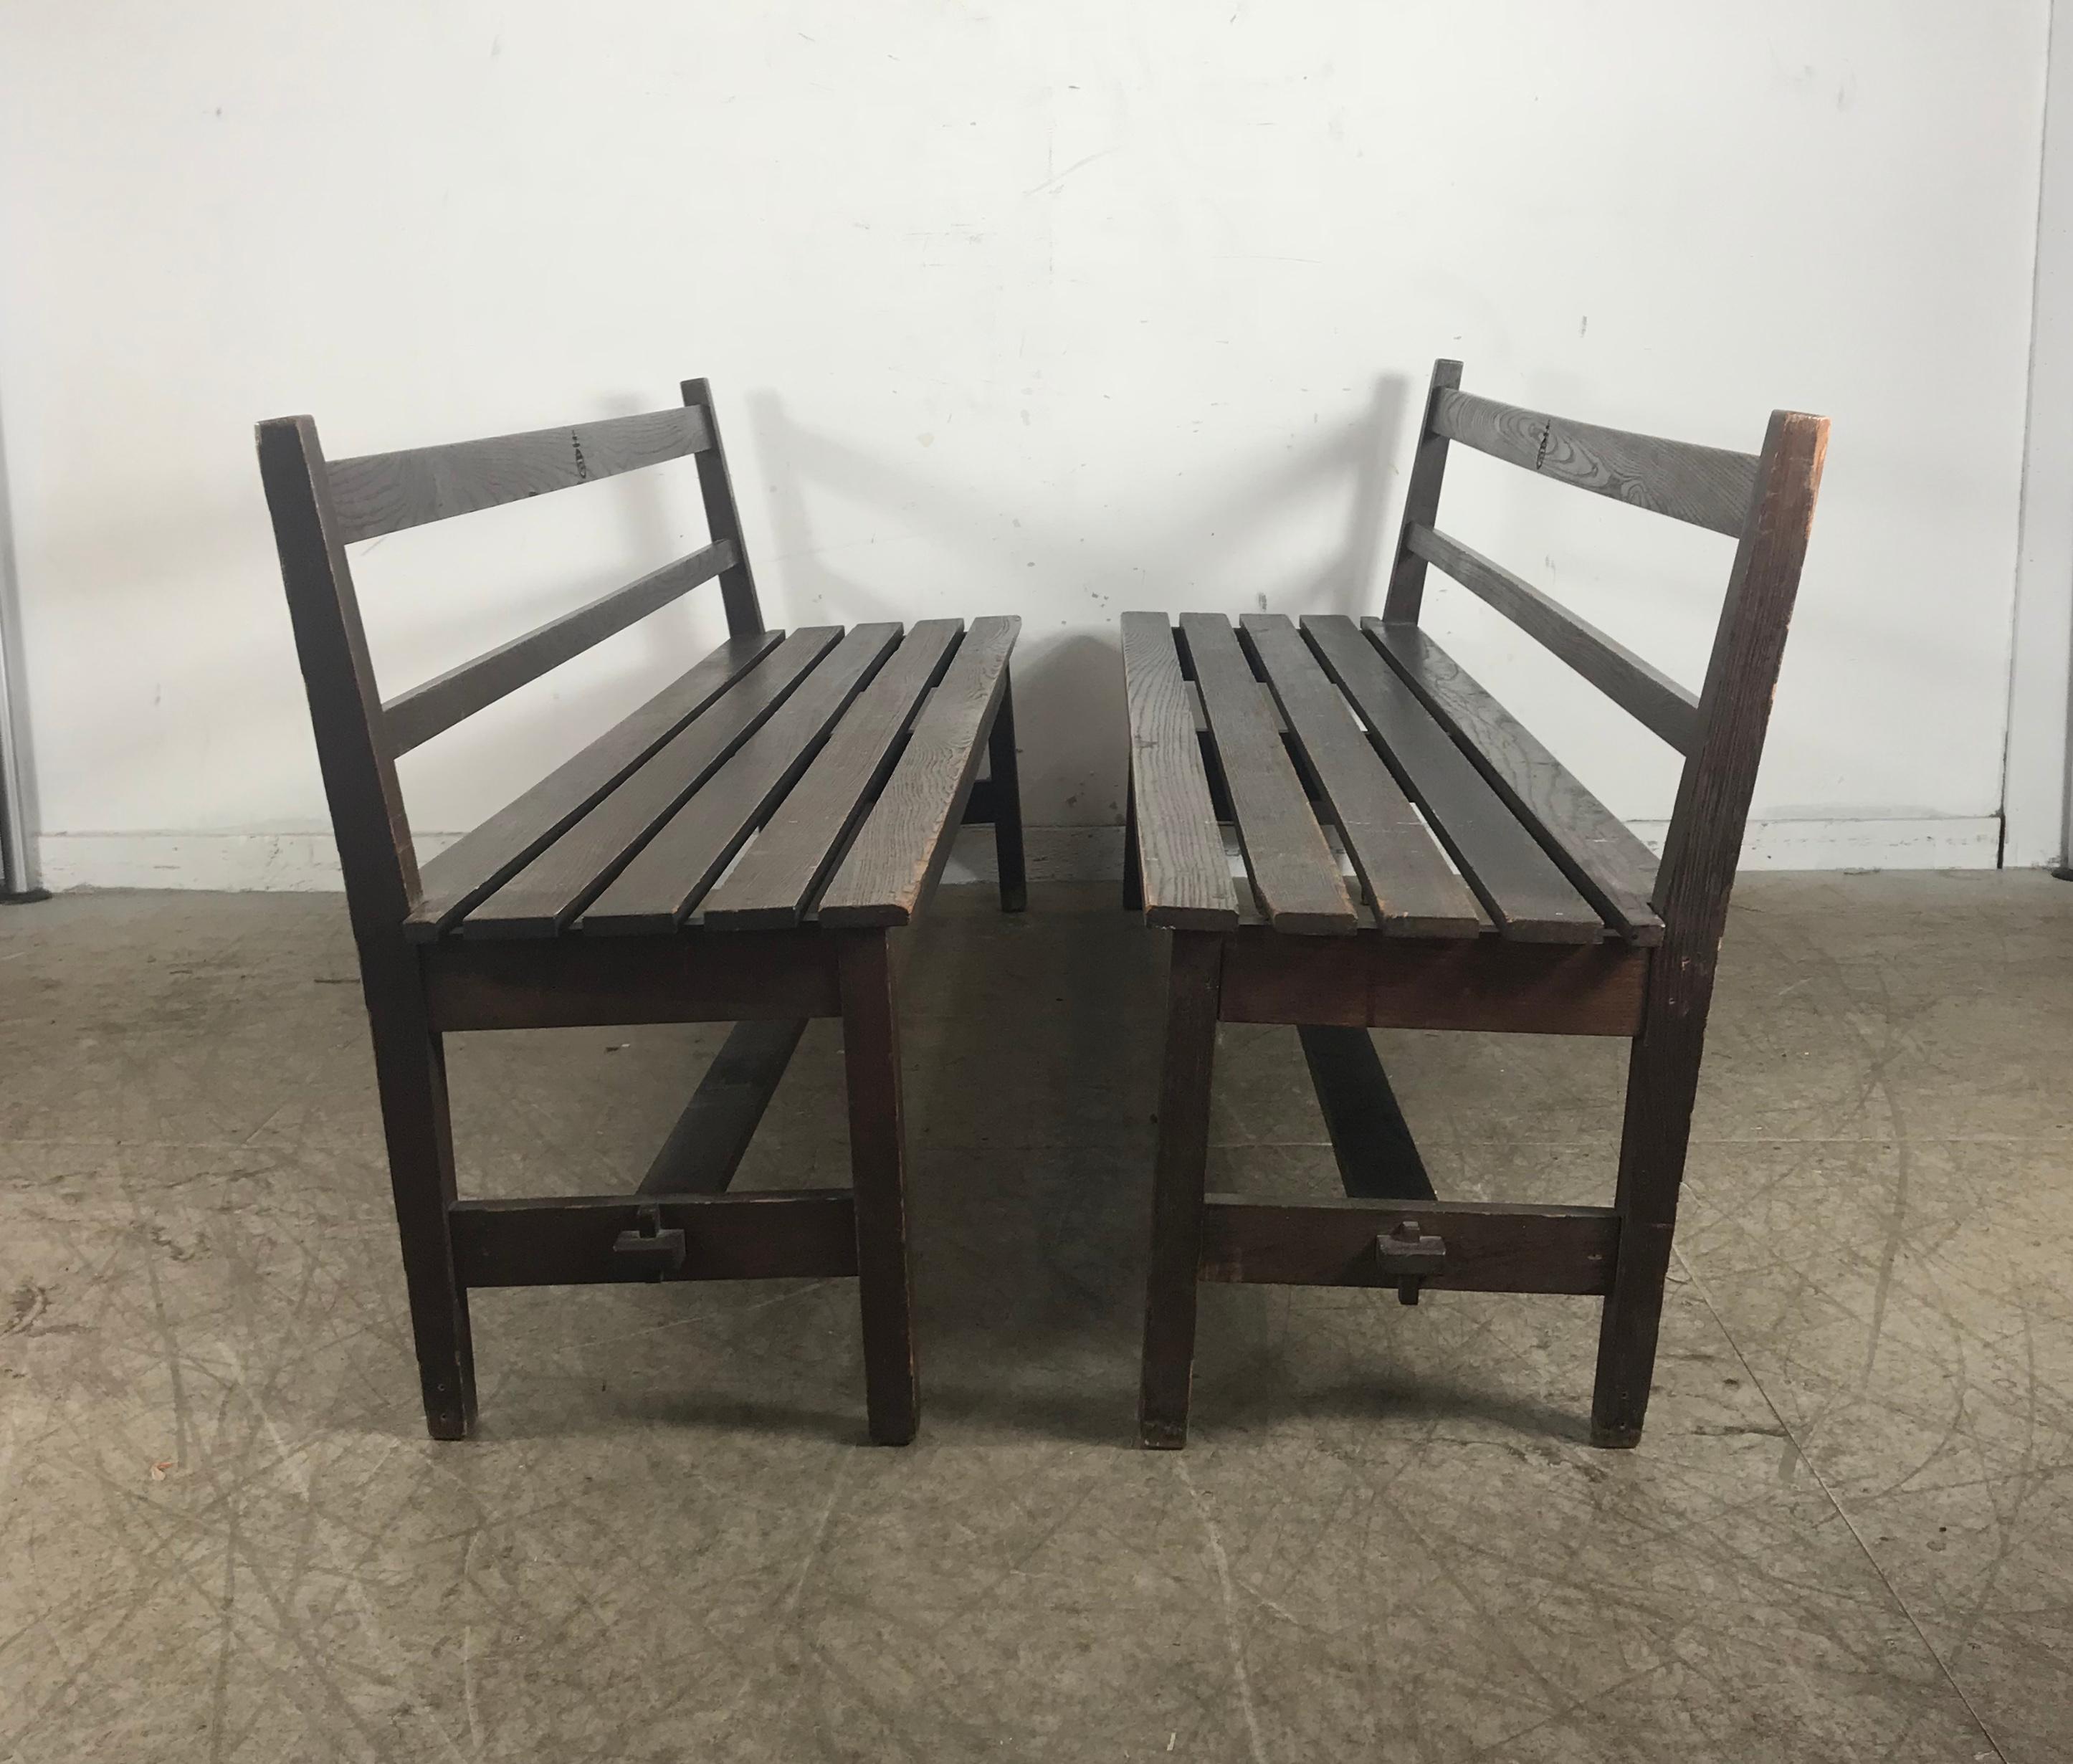 Rare pair of Roycroft oak benches, inventory numbered, custom built exclusively for the Roycroft Inn, East Aurora NY. Amazing quality and construction, retain original Roycroft orb mark as well as incised inventory numbers. Hand delivery avail to